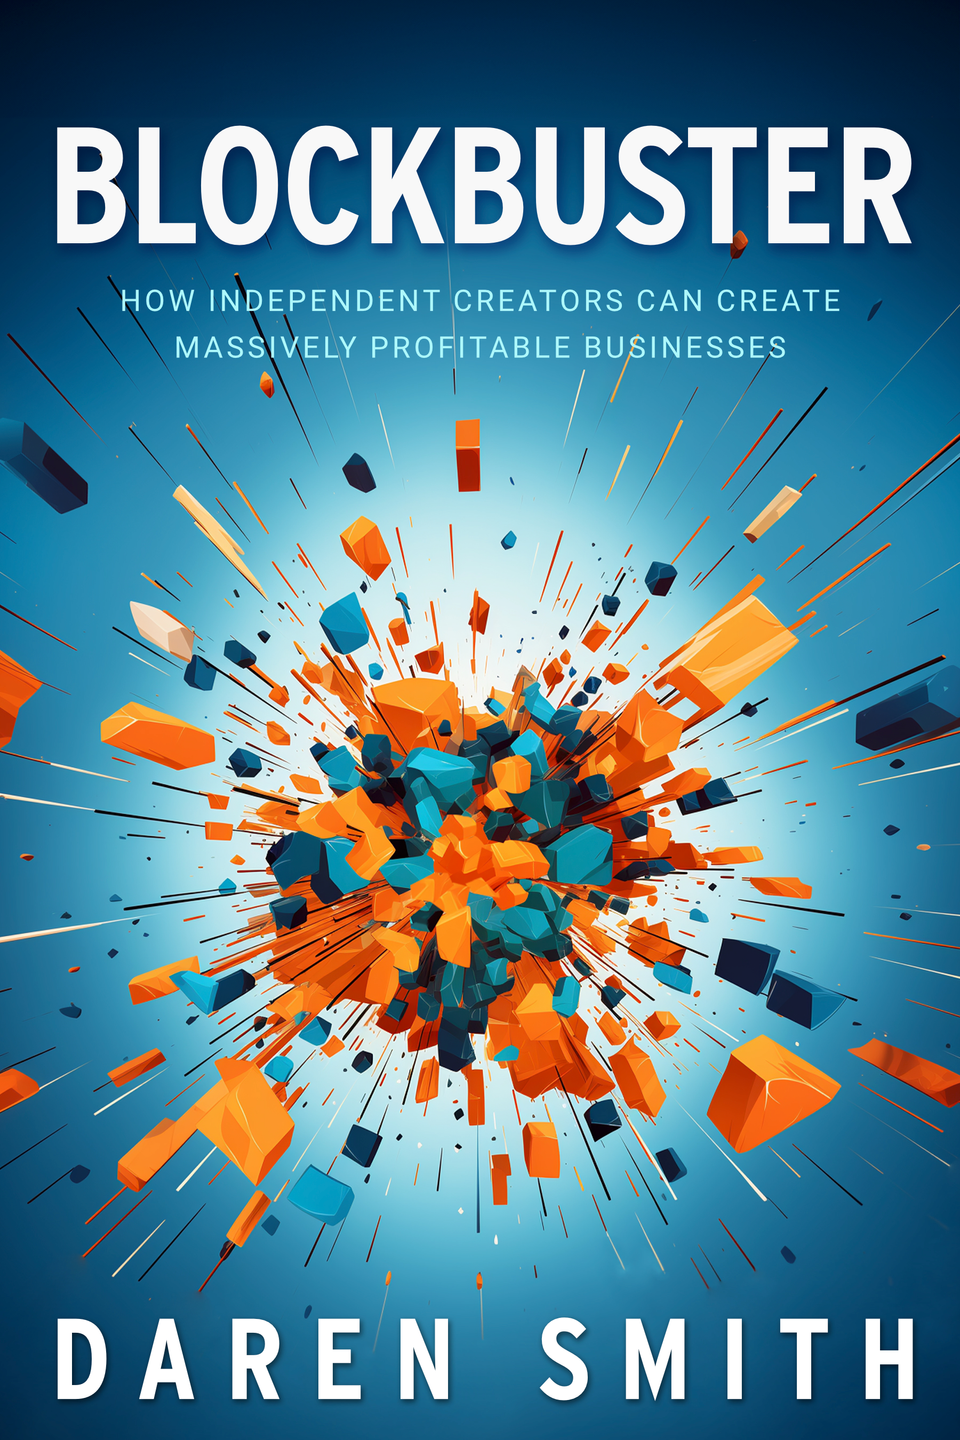 Blockbuster - How Independent Creators Can Build Massively Profitable Businesses